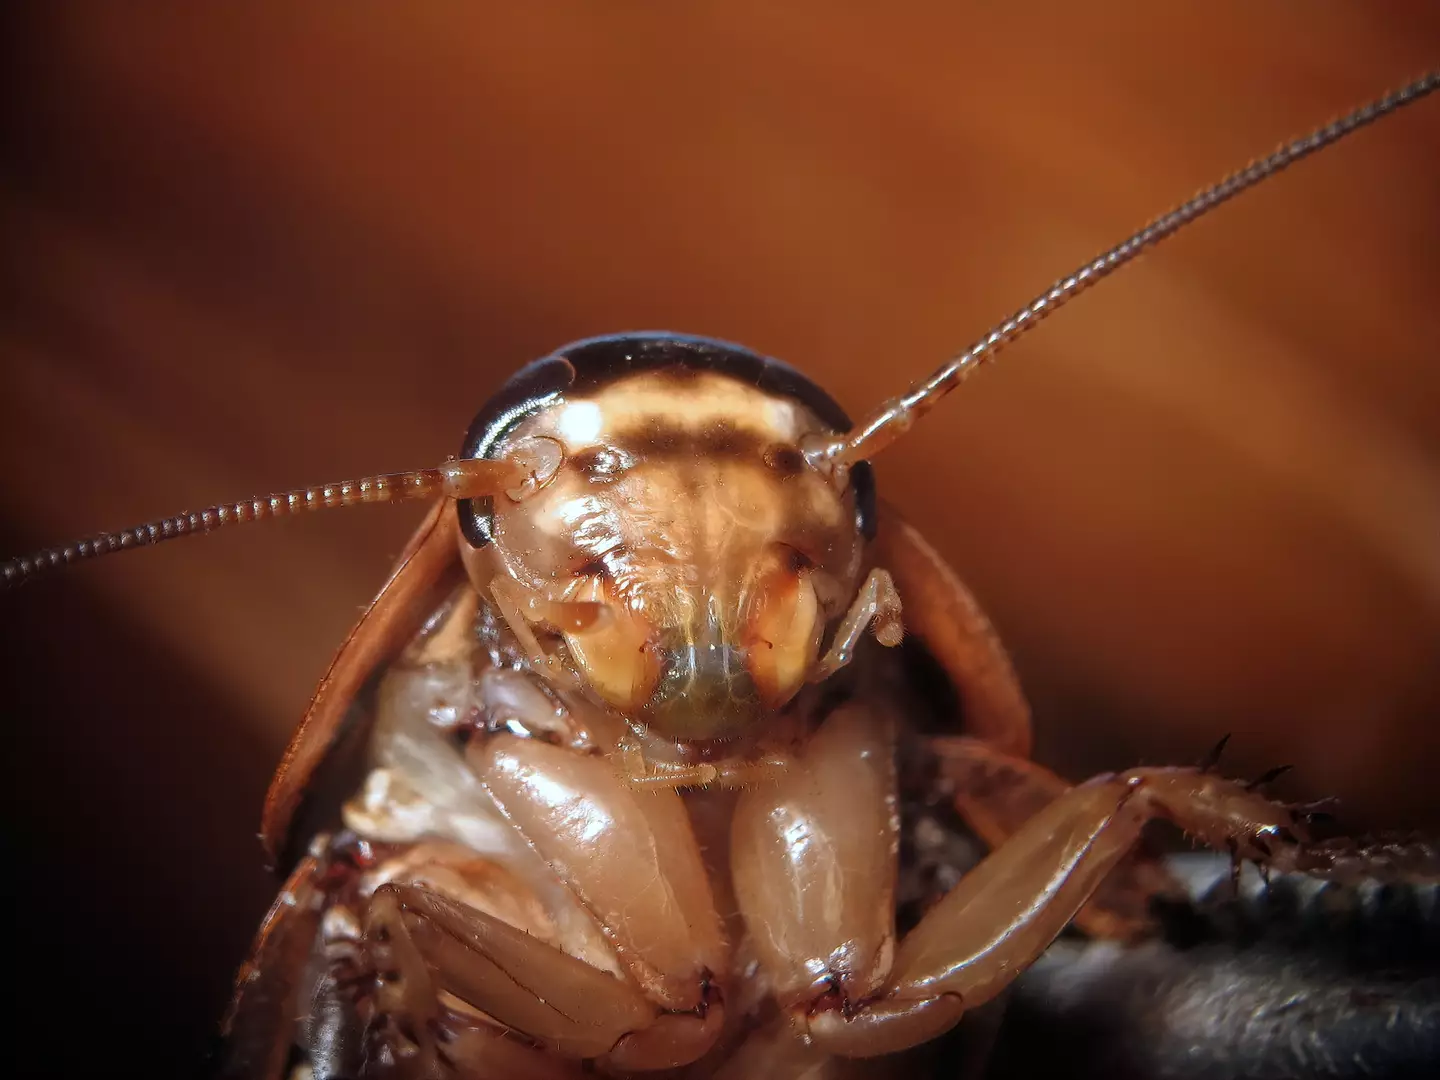 Thousands of people in previous years have named a cockroach after their ex.